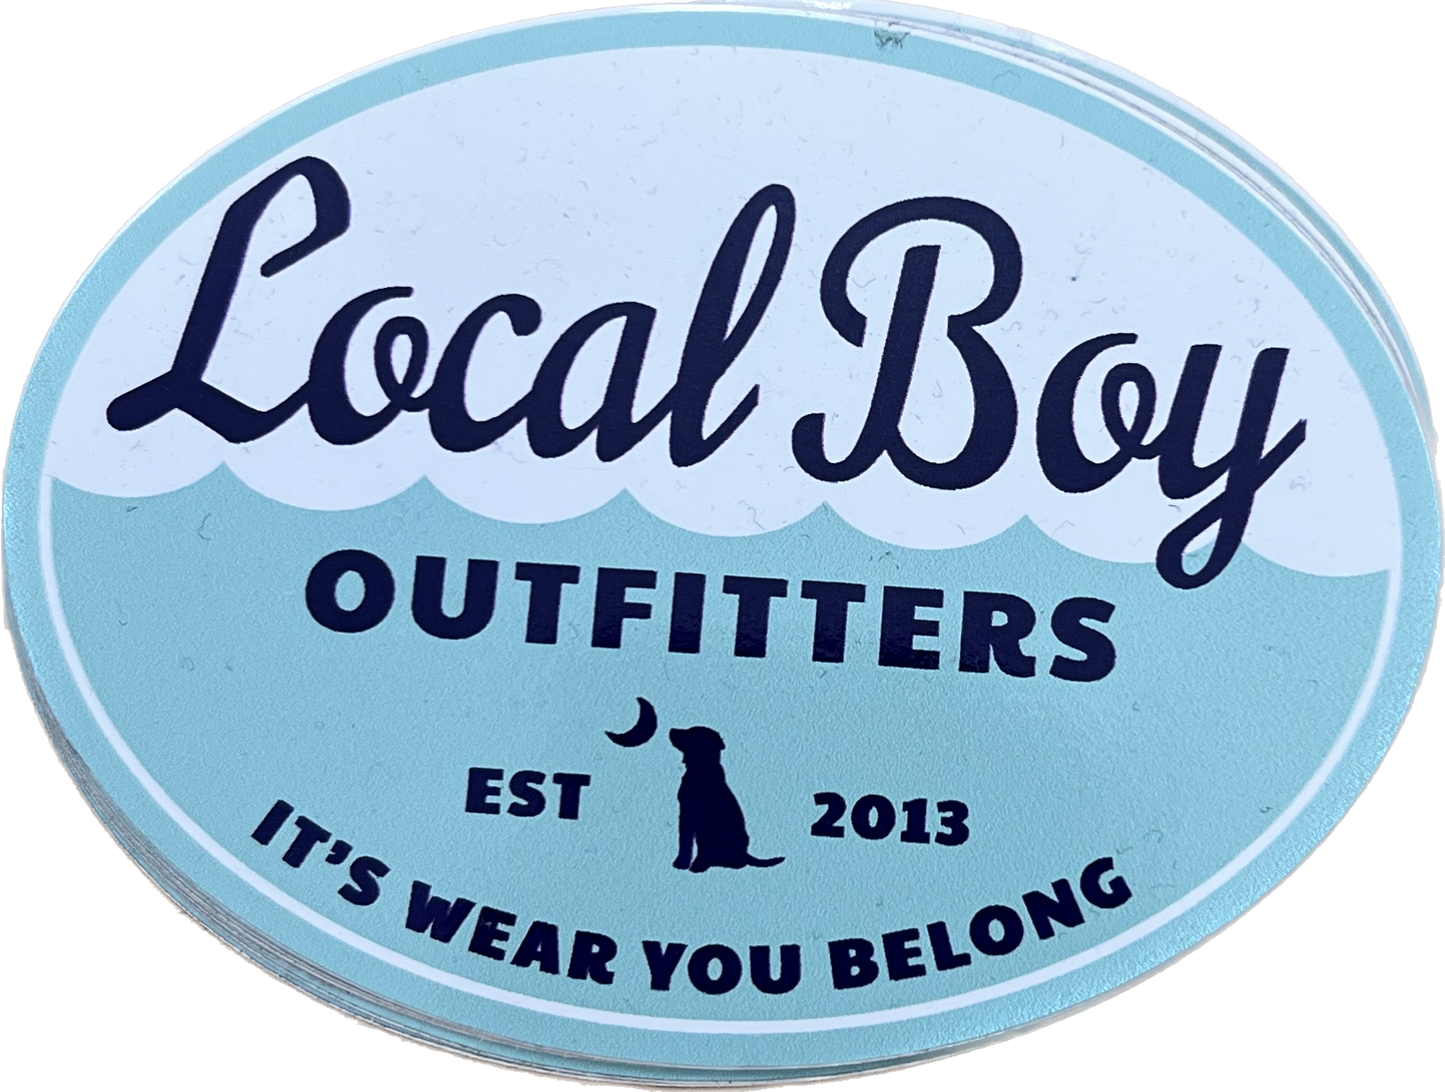 Local Boy Waves Decal Mint